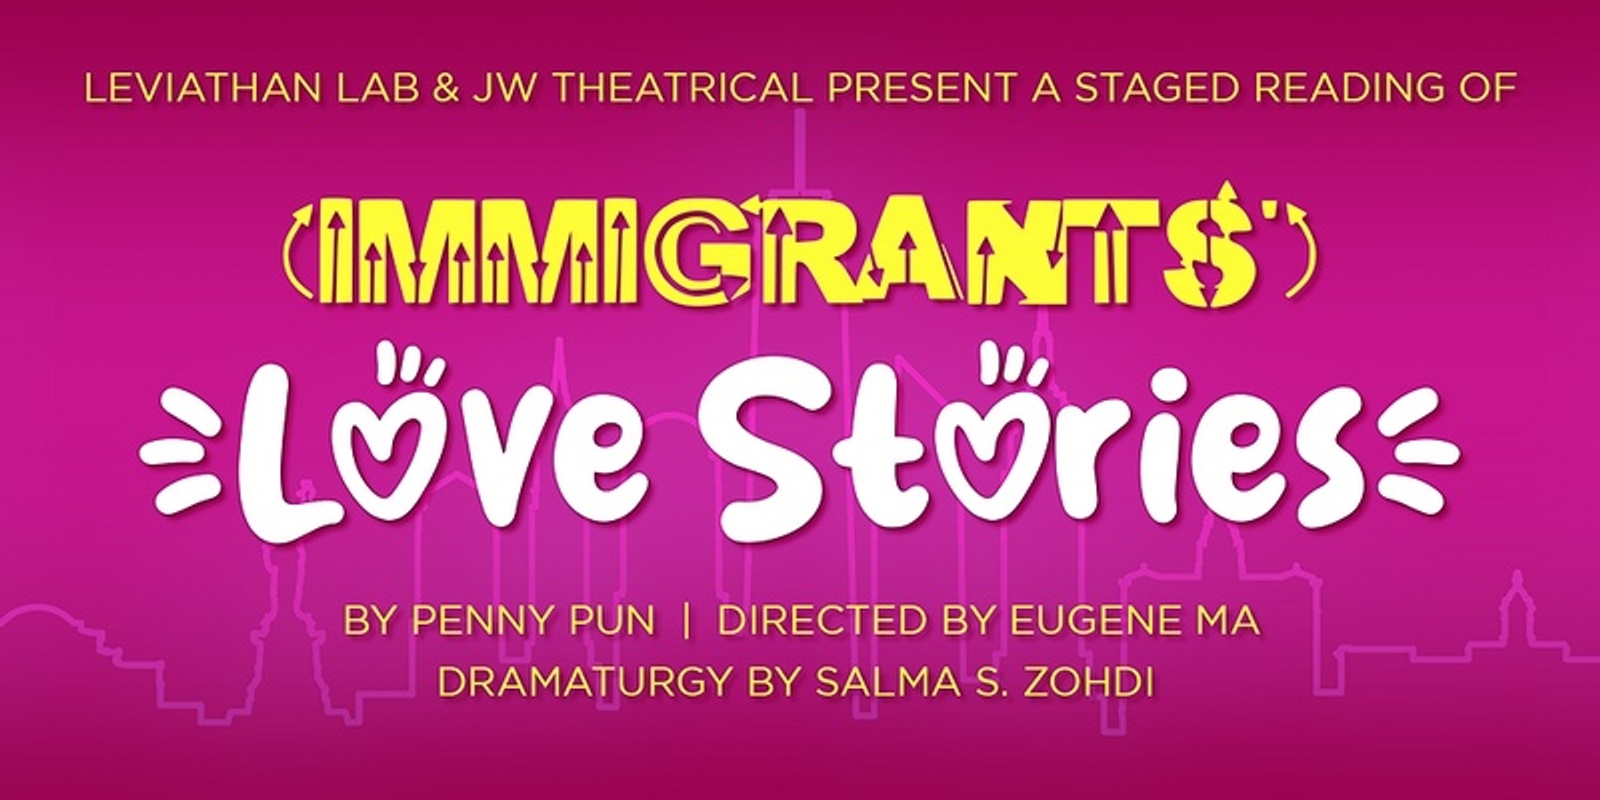 Banner image for (Immigrants') Love Stories